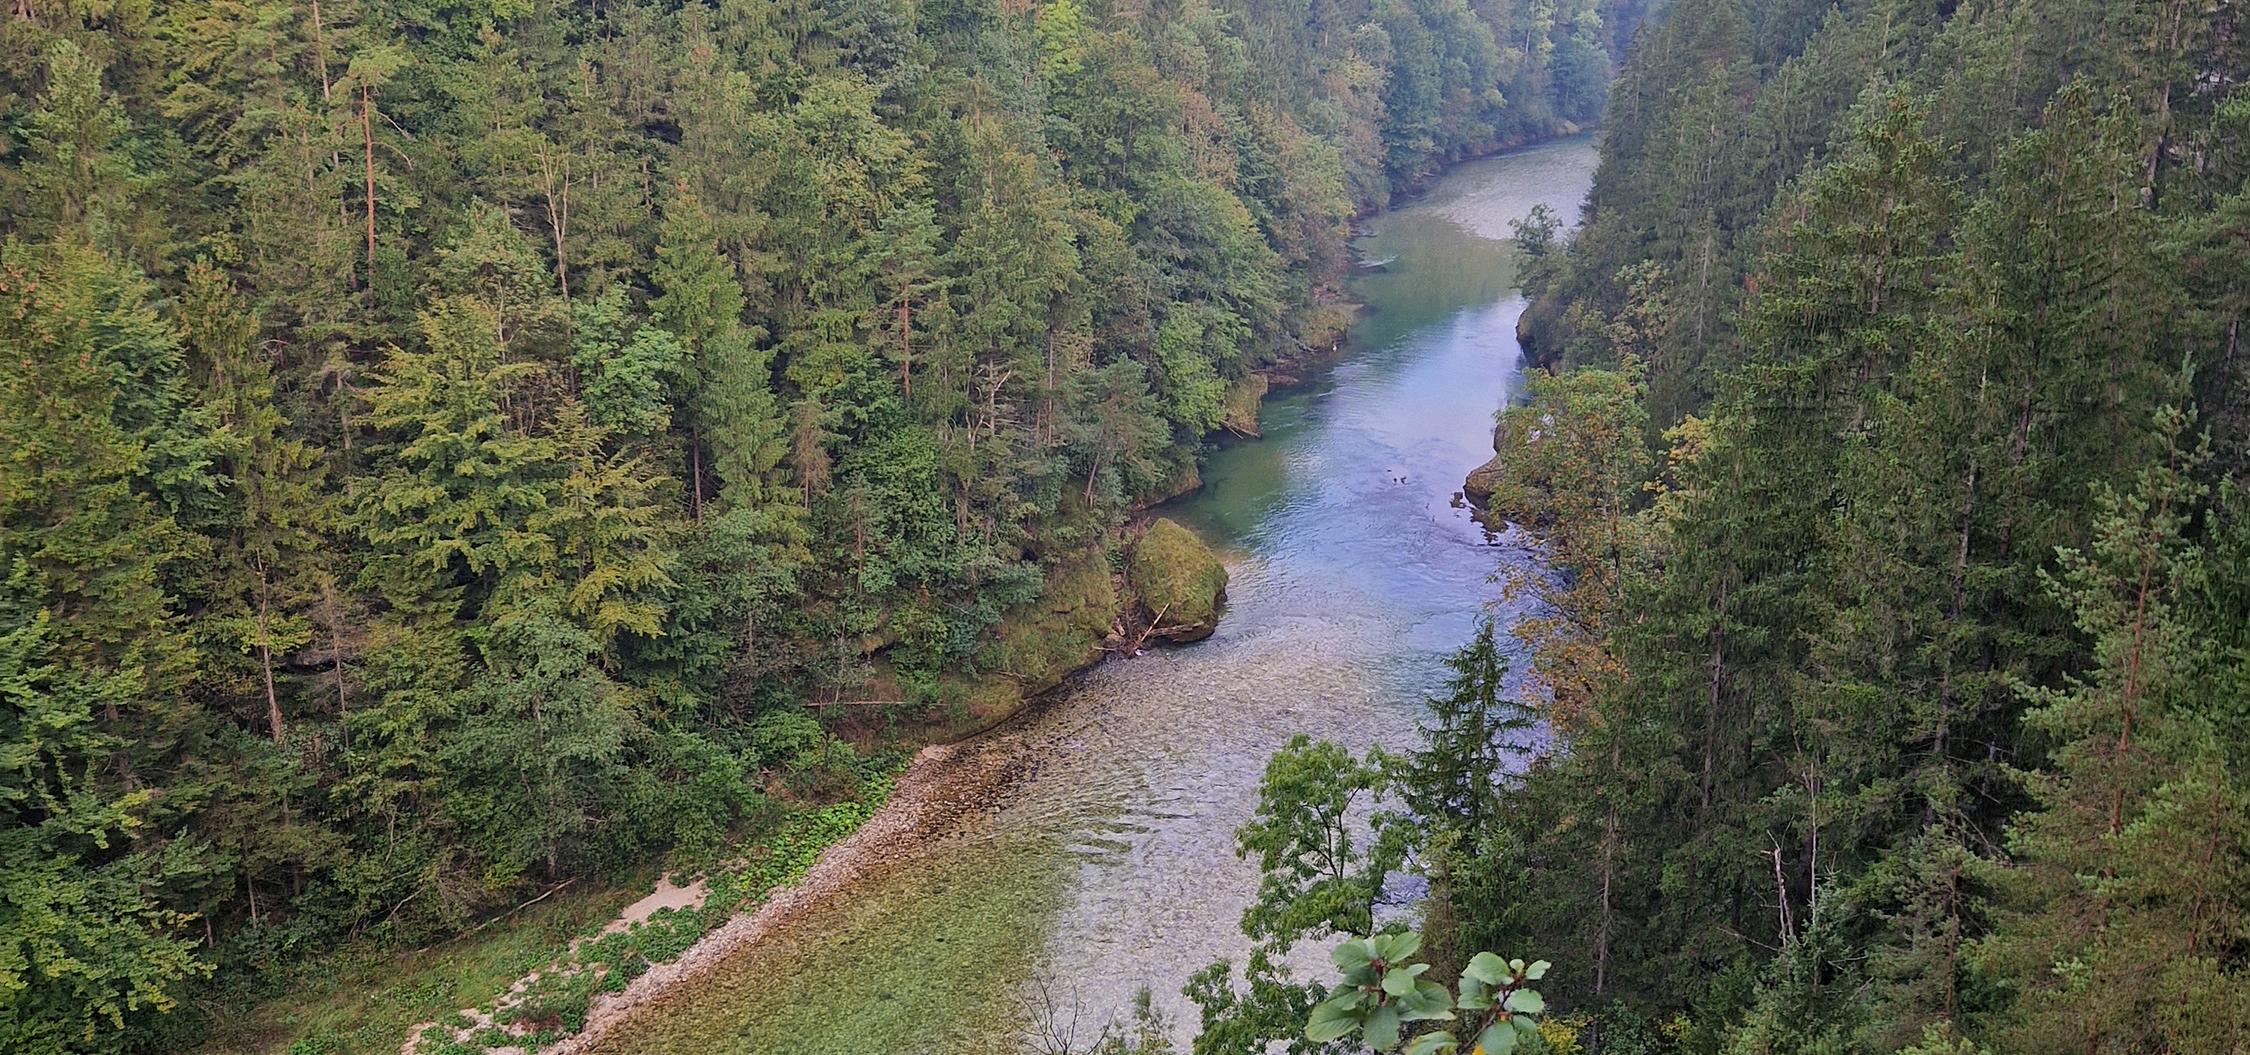 The Steyr River flows through a forest-lined gorge